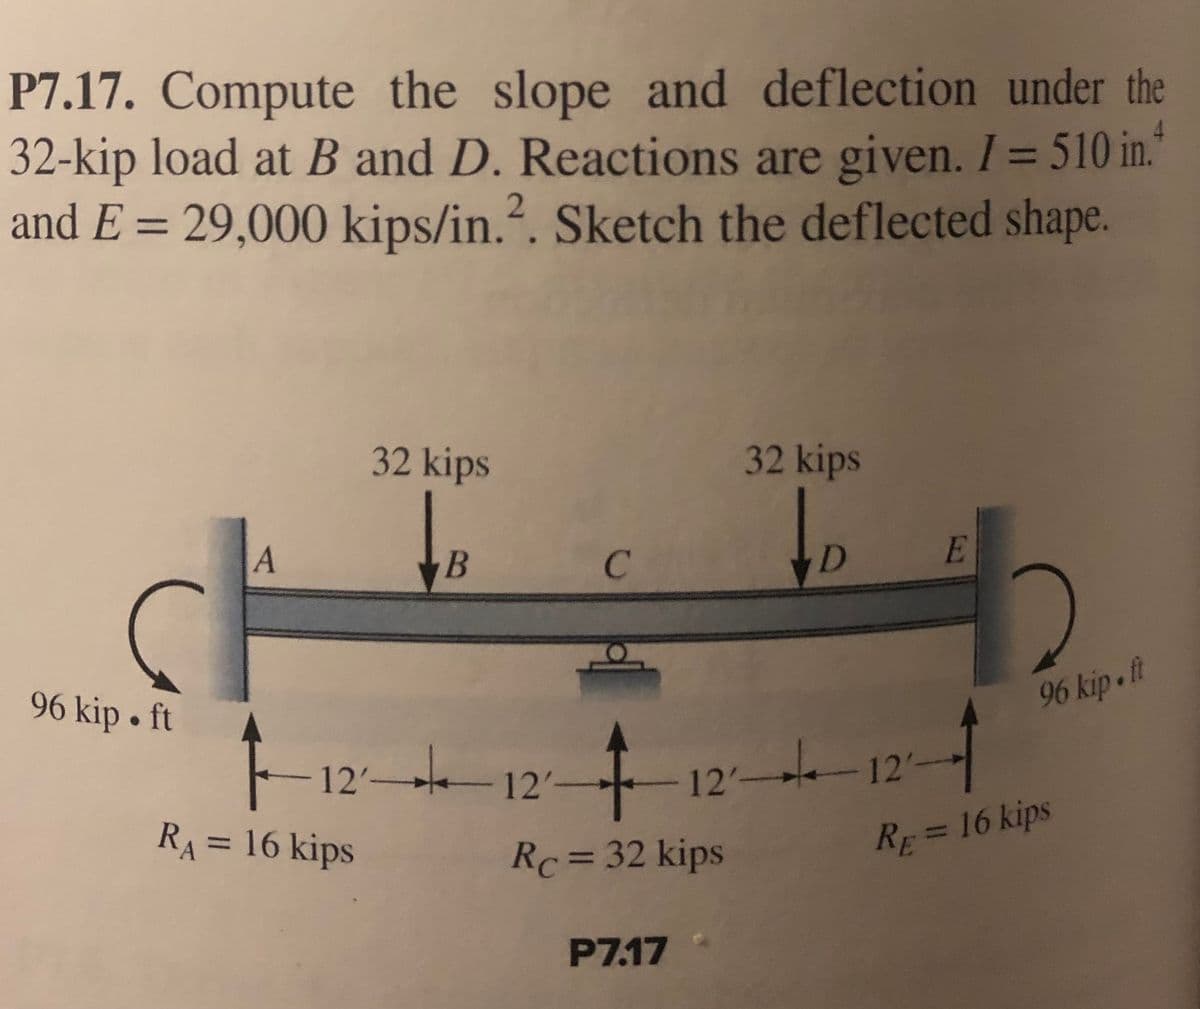 P7.17. Compute the slope and deflection under the
32-kip load at B and D. Reactions are given. I = 510 in.
and E = 29,000 kips/in.?. Sketch the deflected shape.
%3D
32 kips
32 kips
B
D.
96 kip • ft
96 kip ft
12 12-
4.
12'-12-
RA= 16 kips
RE= 16 kips
%3D
Rc%3D32 kips
P7.17
